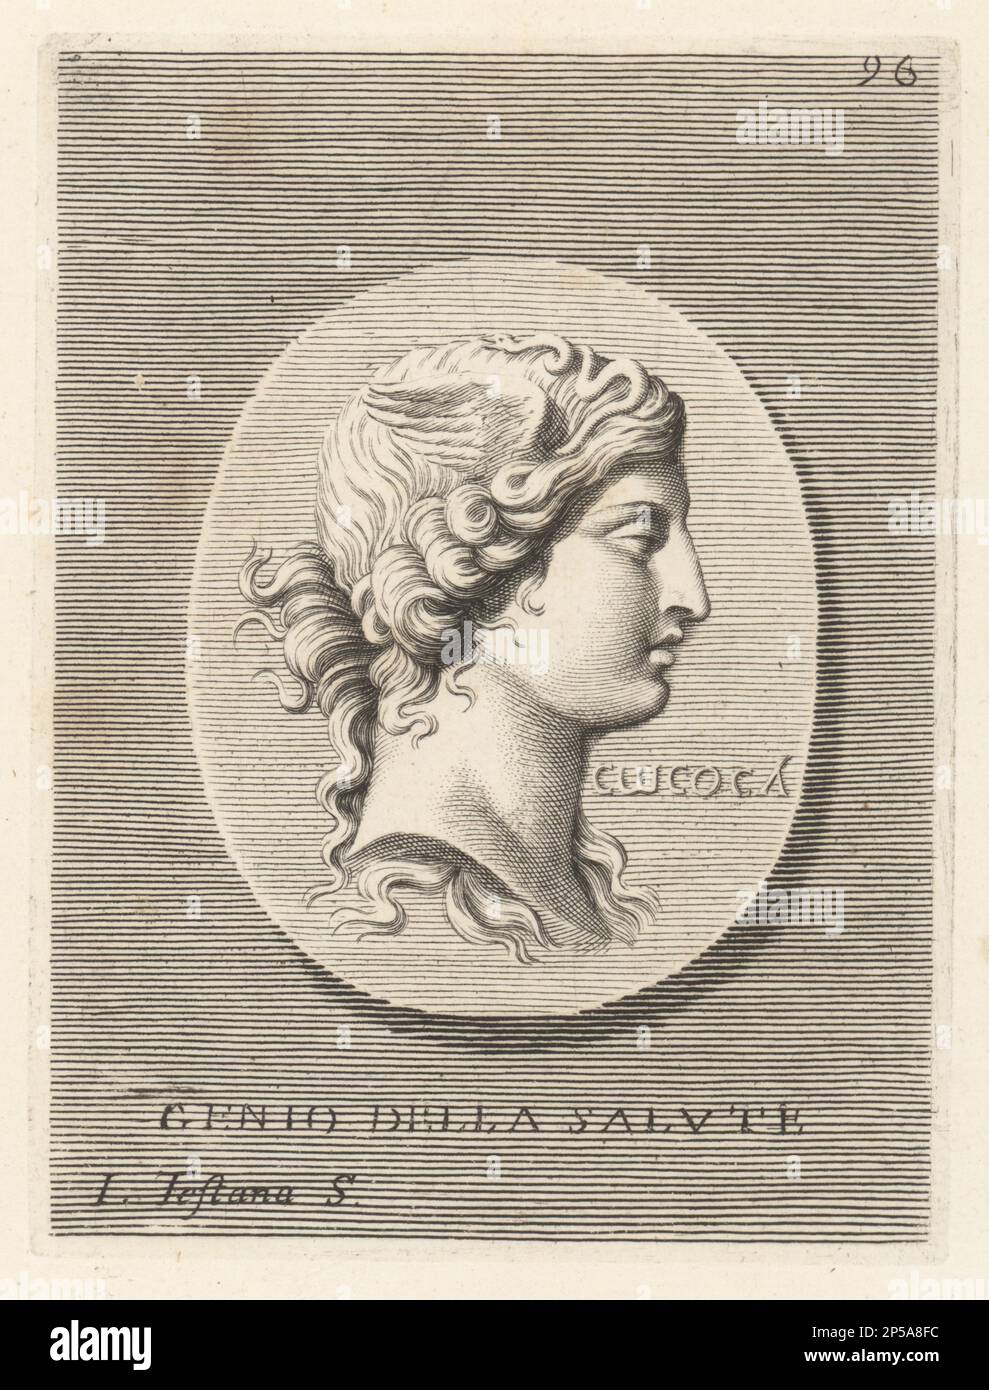 Head of an allegorical female figure of Health. A woman with her hair intricately braided like flames, as represented by the Gnostic Copts of Egypt. Testa simbolica rappresentante il Genio della Salute. Copperplate engraving by Joseph Testana after Giovanni Angelo Canini from Iconografia, cioe disegni d'imagini de famosissimi monarchi, regi, filososi, poeti ed oratori dell' Antichita, Drawings of images of famous monarchs, kings, philosophers, poets and orators of Antiquity, Ignatio de’Lazari, Rome, 1699. Stock Photo